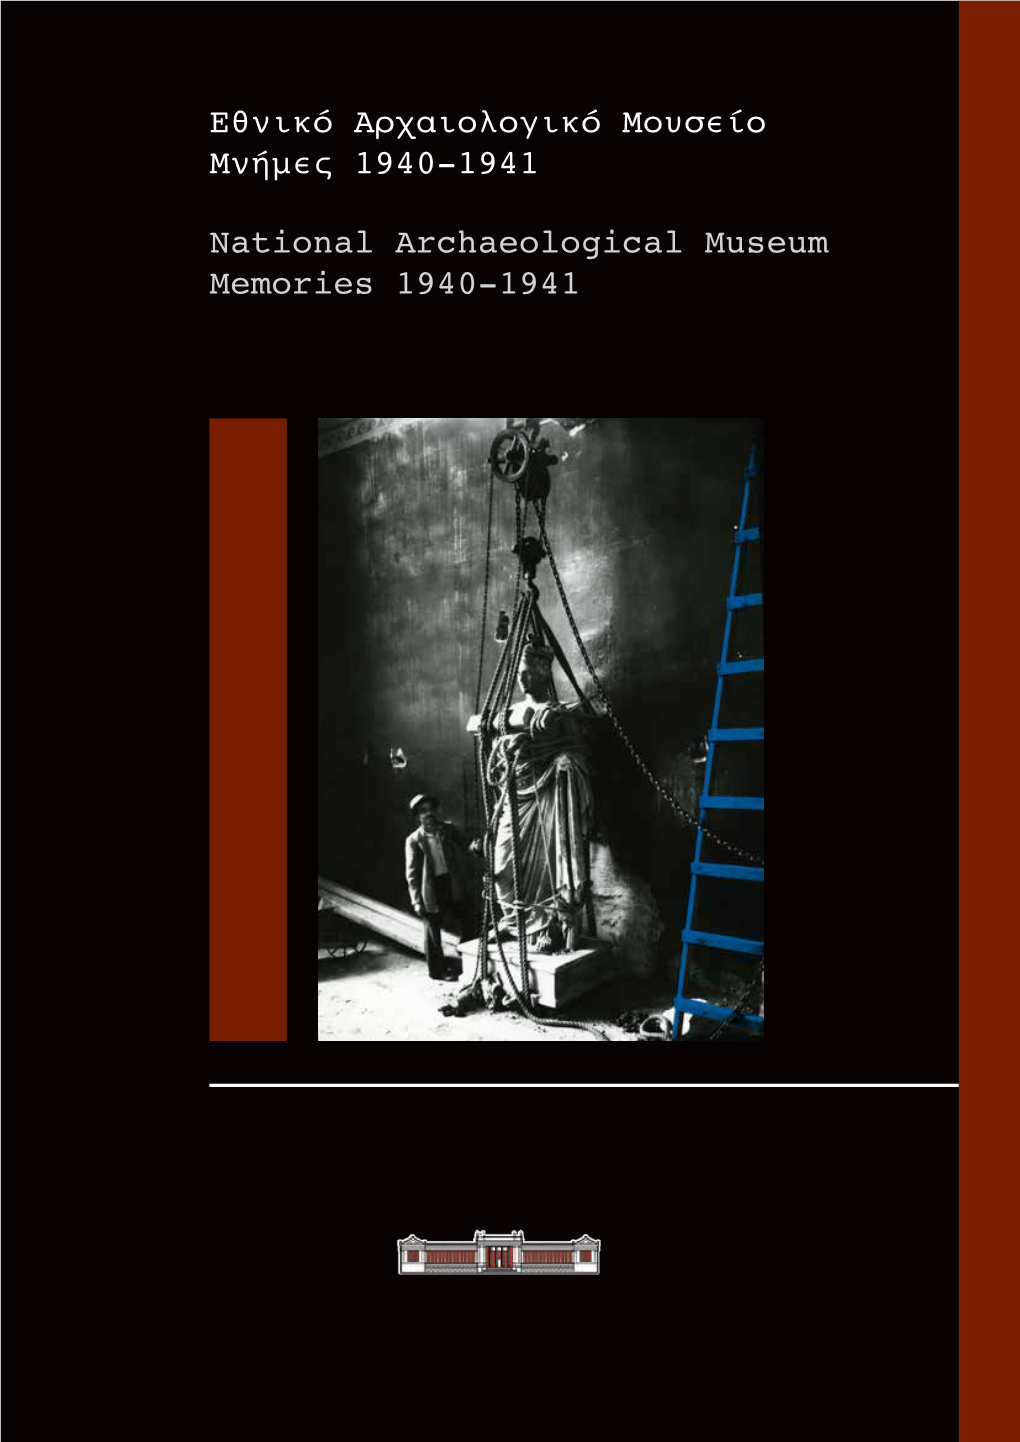 National Archaeological Museum Memories 1940-1941